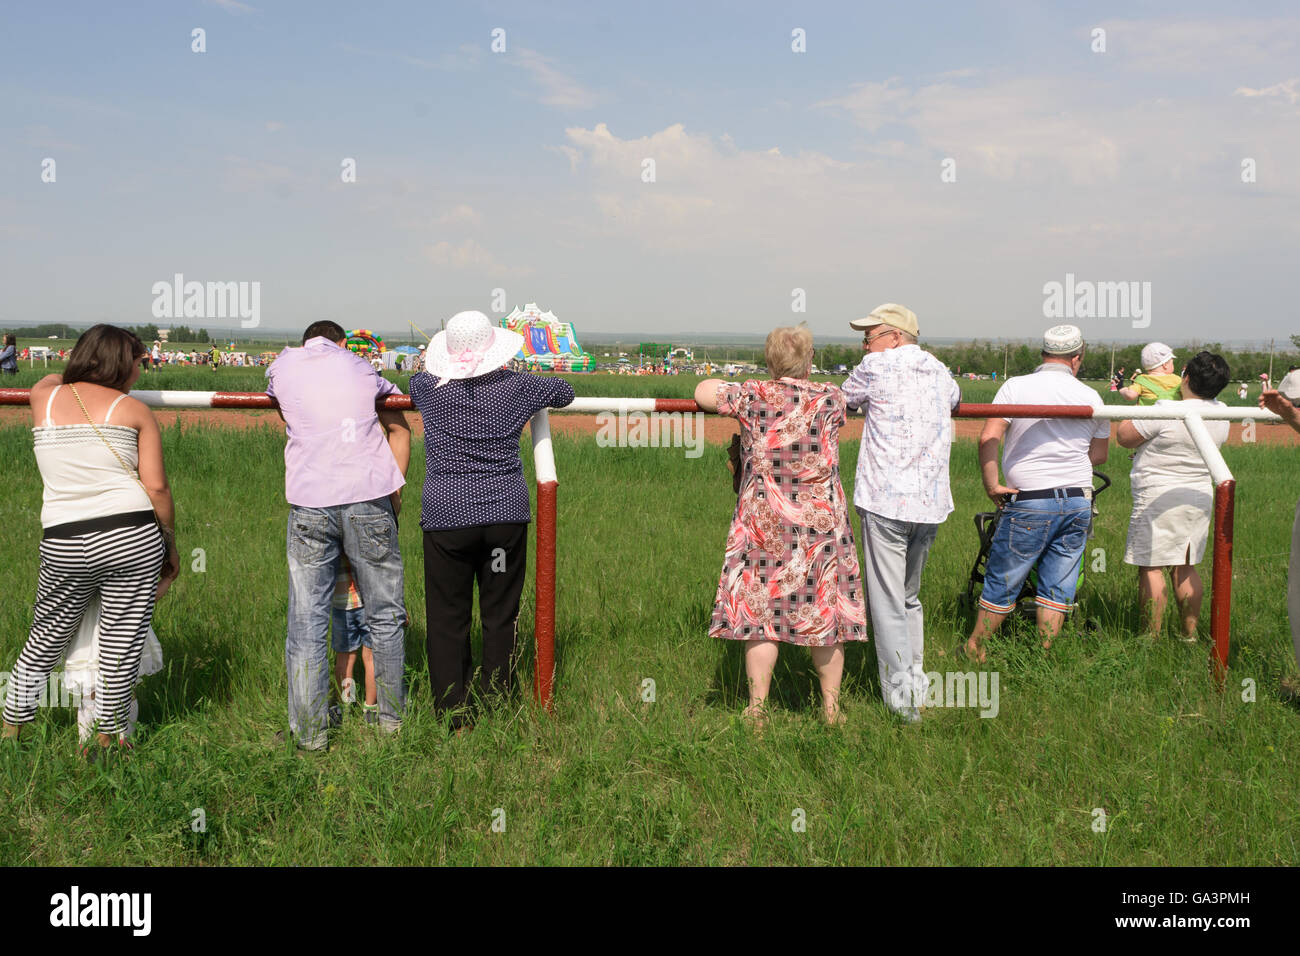 People watching a sporting event horse racing as spectators Stock Photo